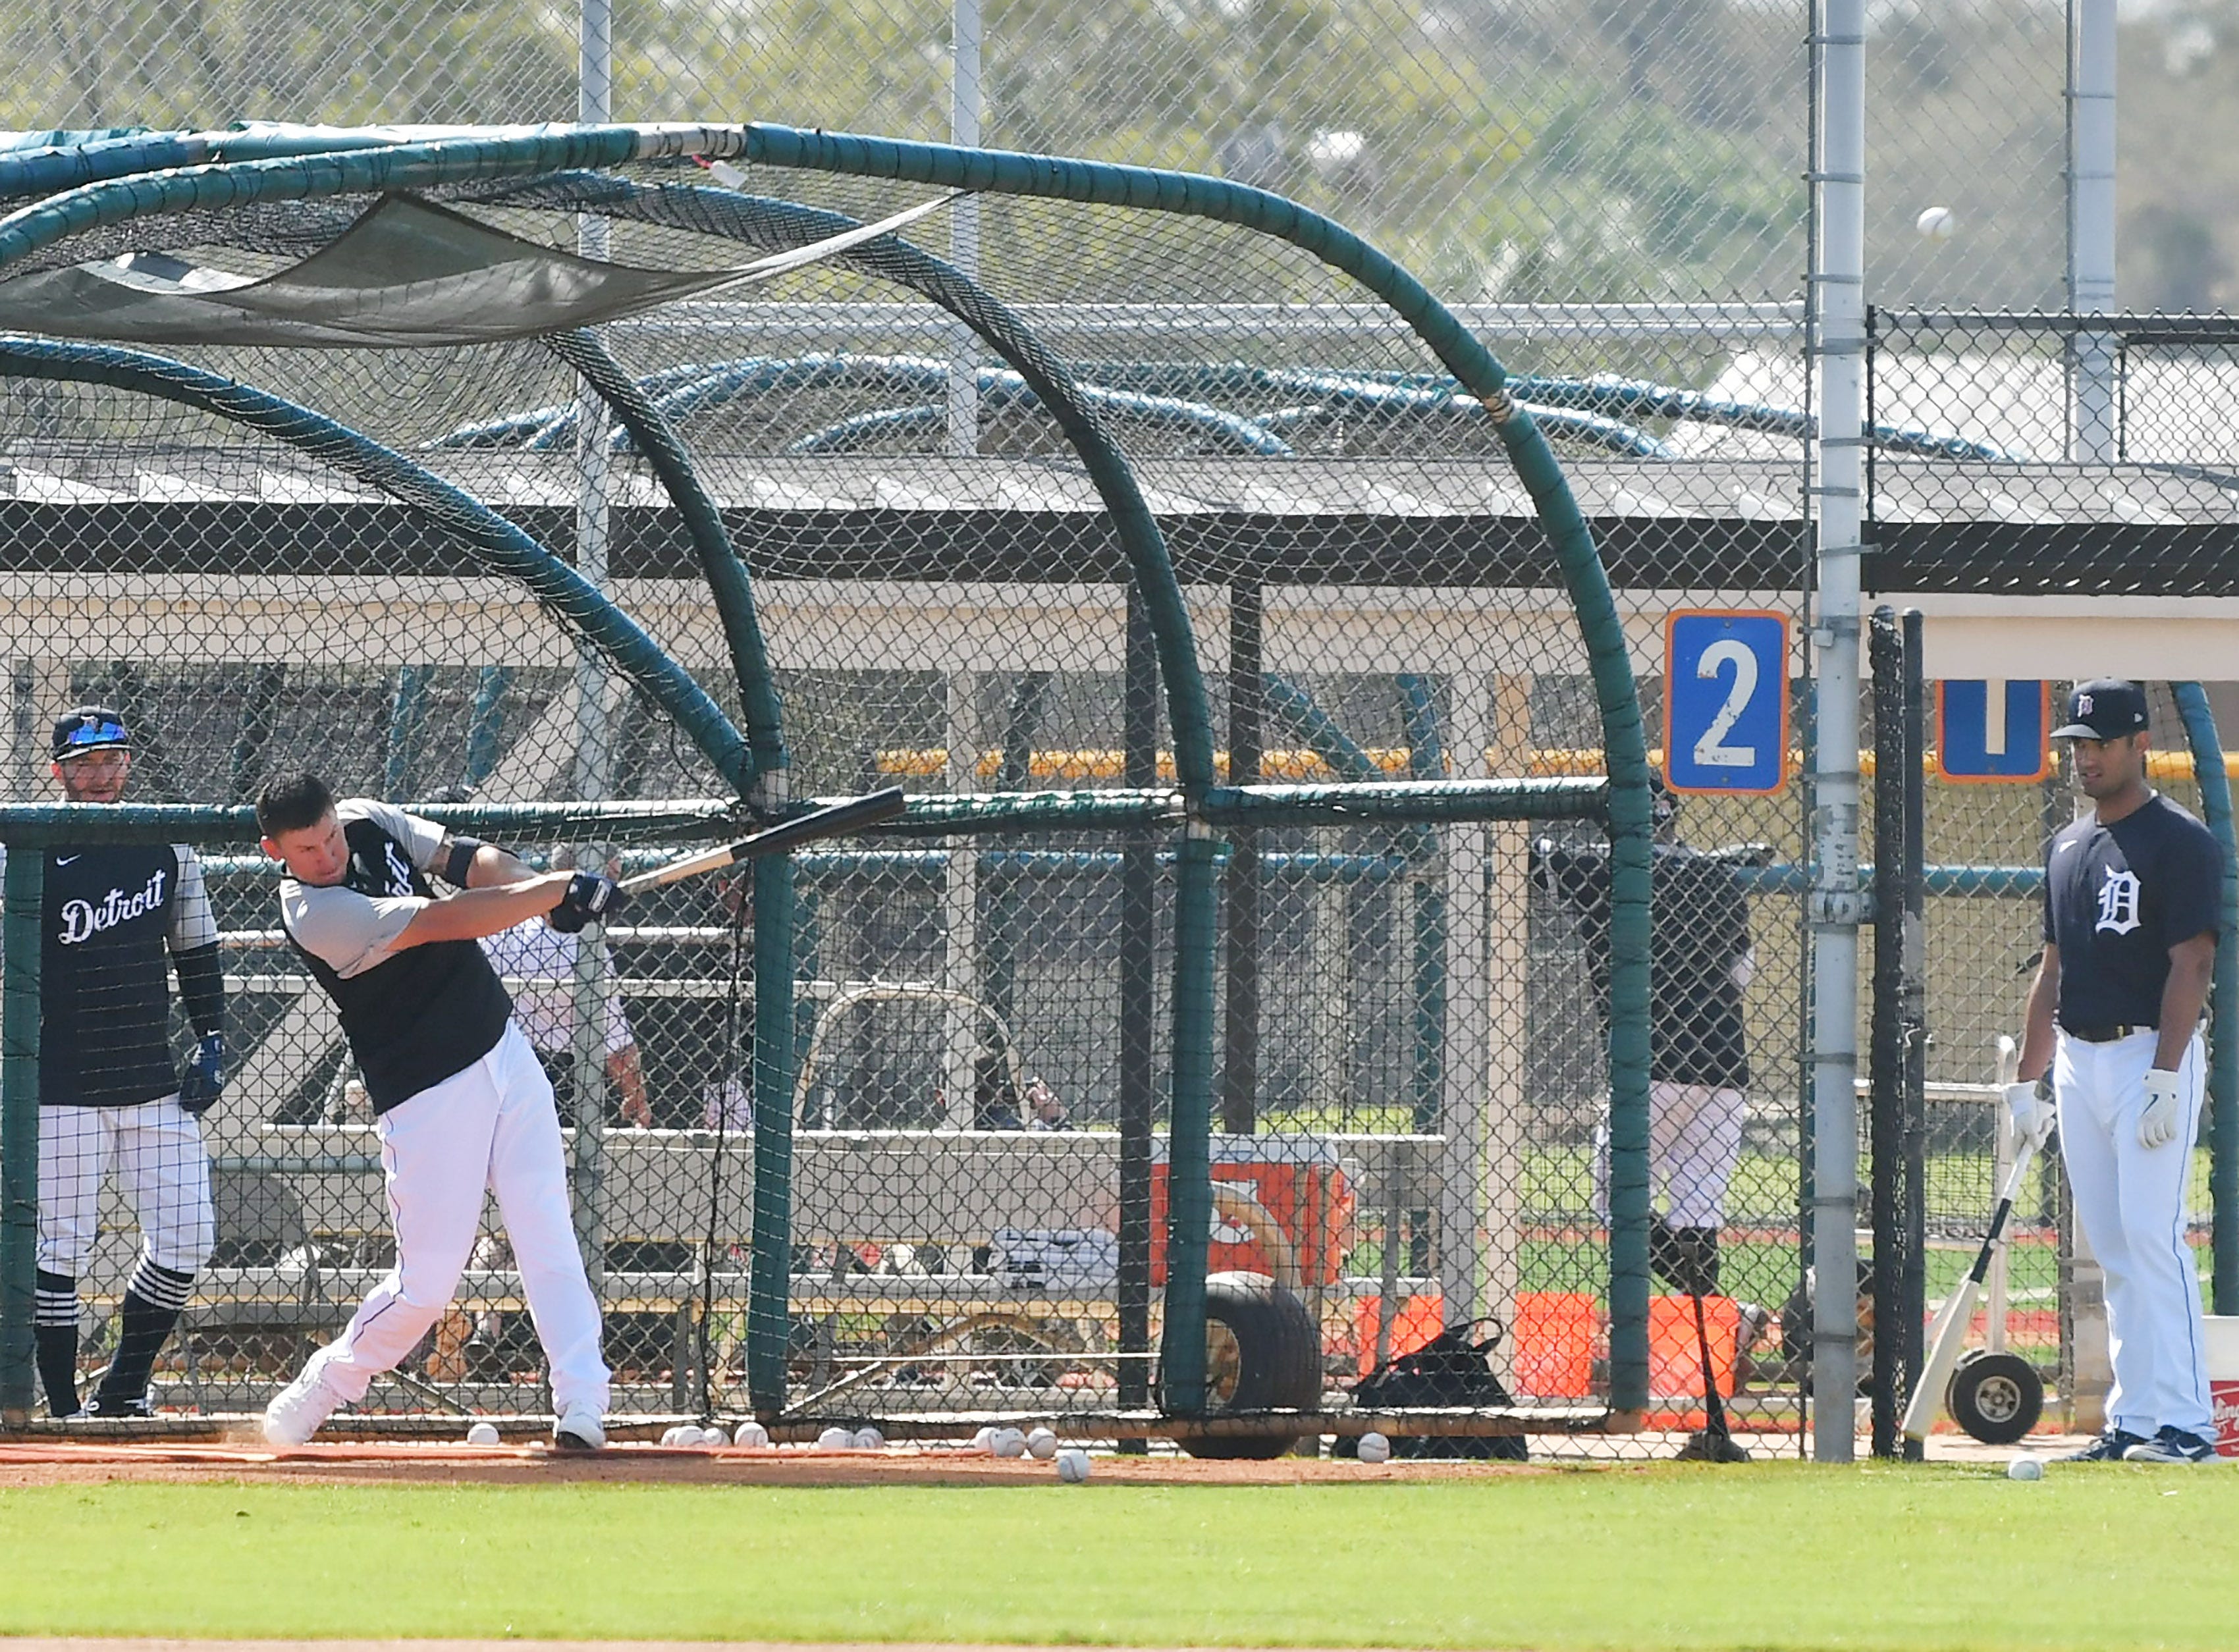 Tigers outfielder JaCoby Jones takes batting practice.